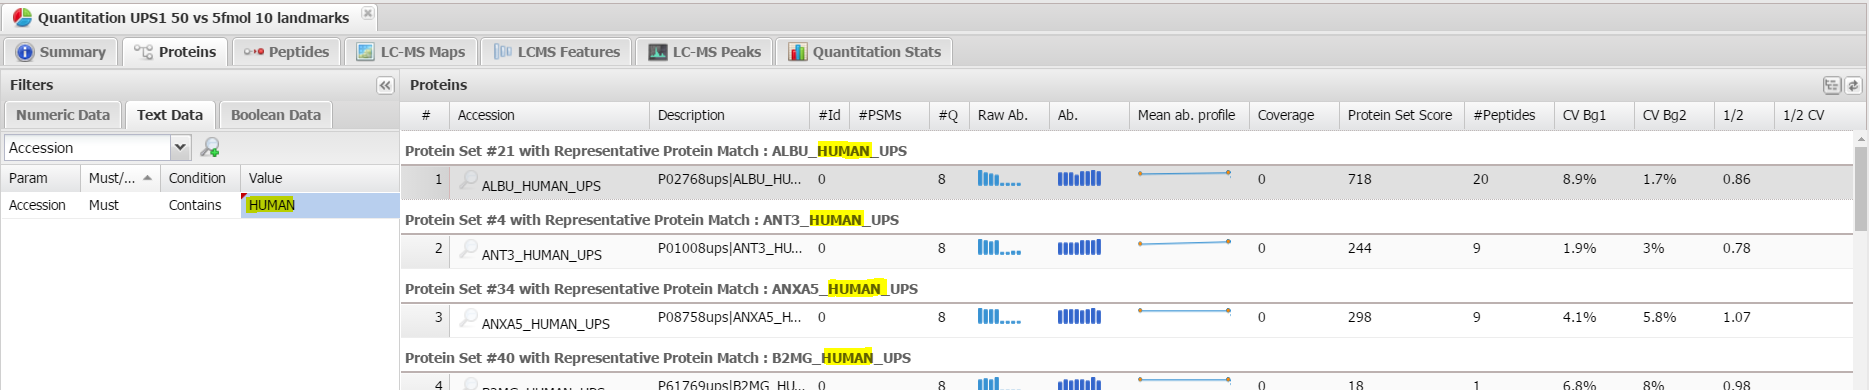 dse_quant_results_proteins_filters.PNG